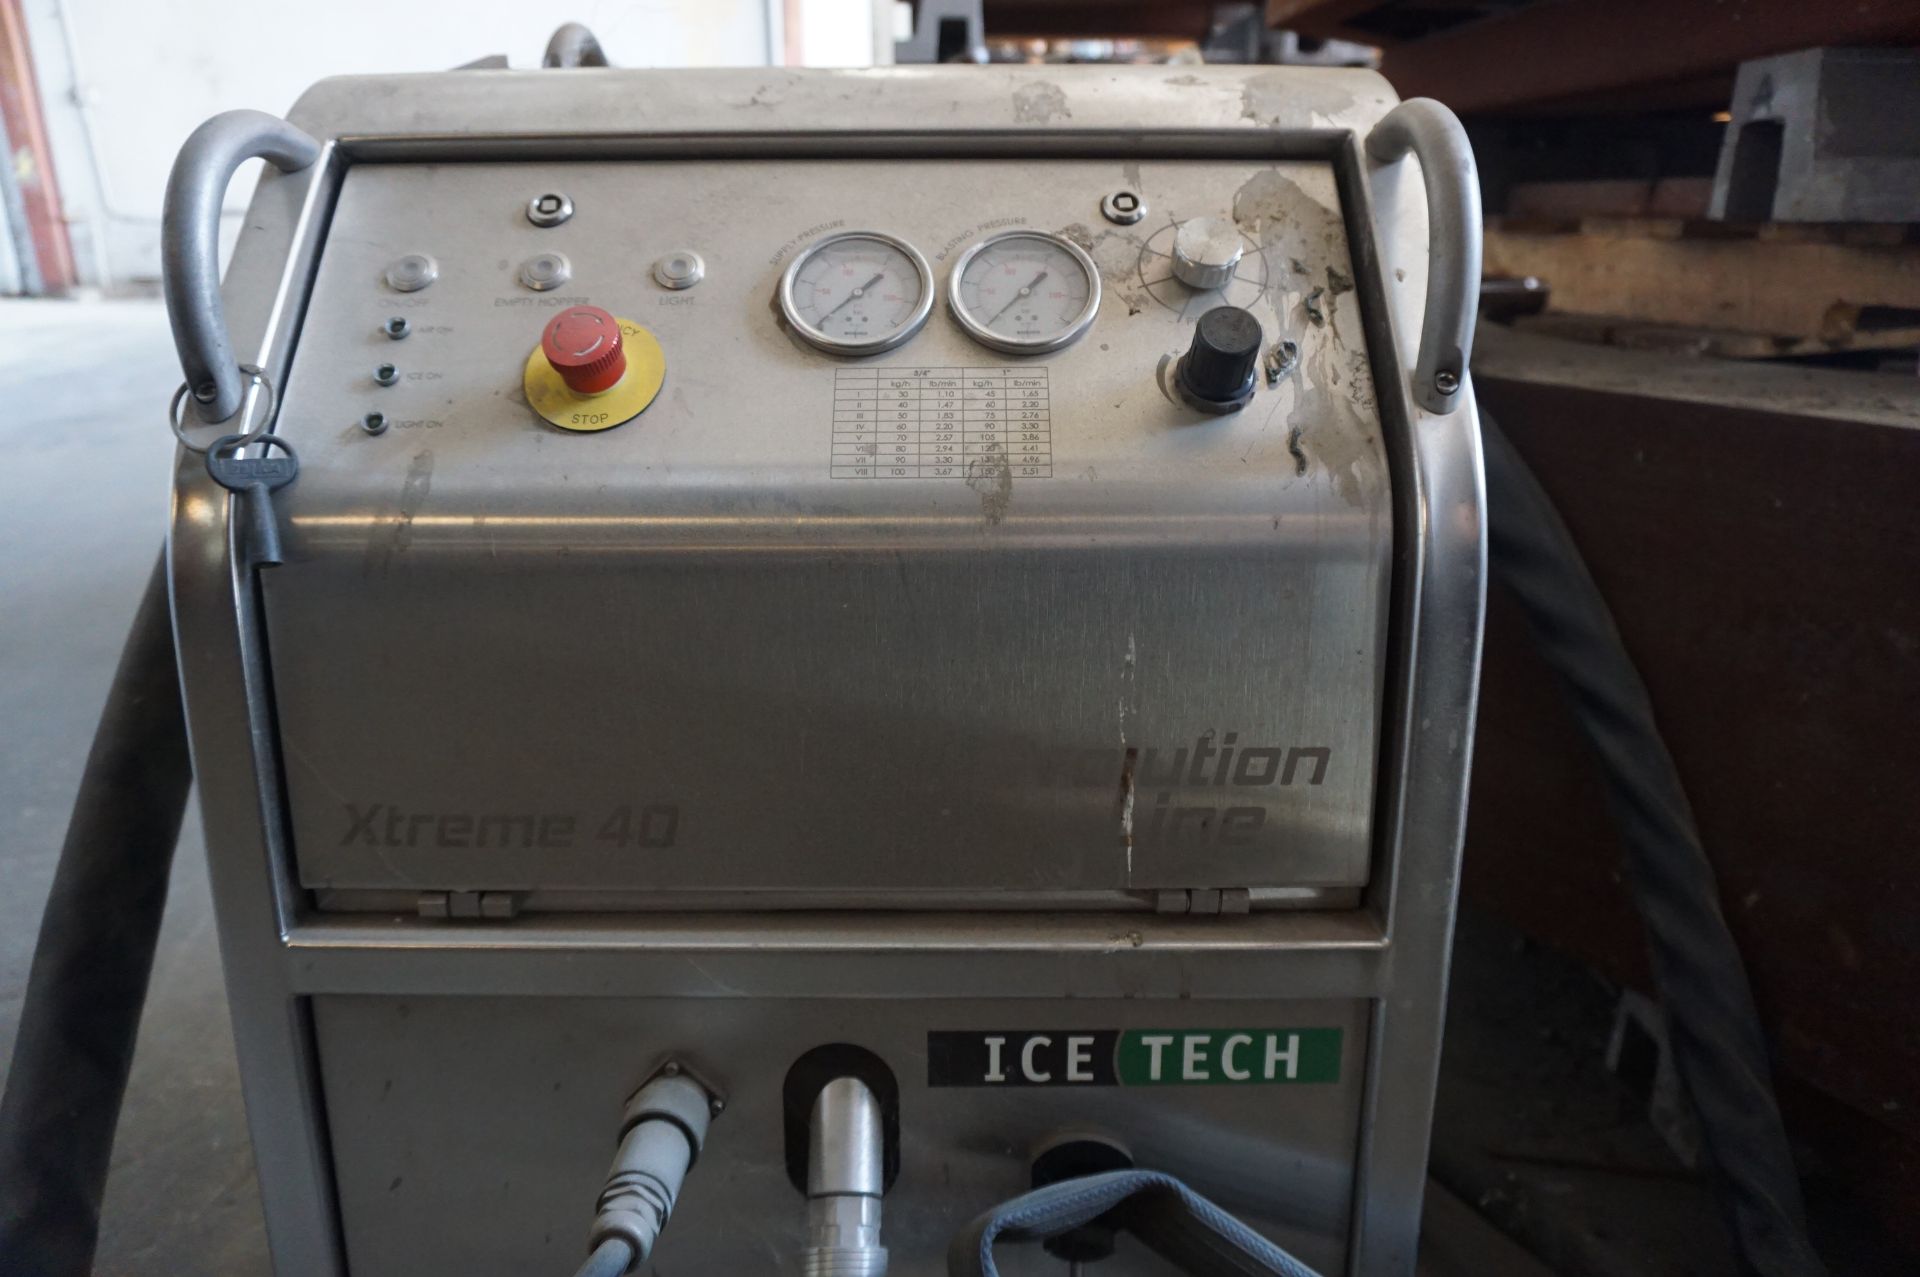 ICE TECH XTREME 40 3/4" INDUSTRIAL DRY ICE BLASTER, MACHINE NO 511710, S/N 15-11-53 - Image 2 of 3